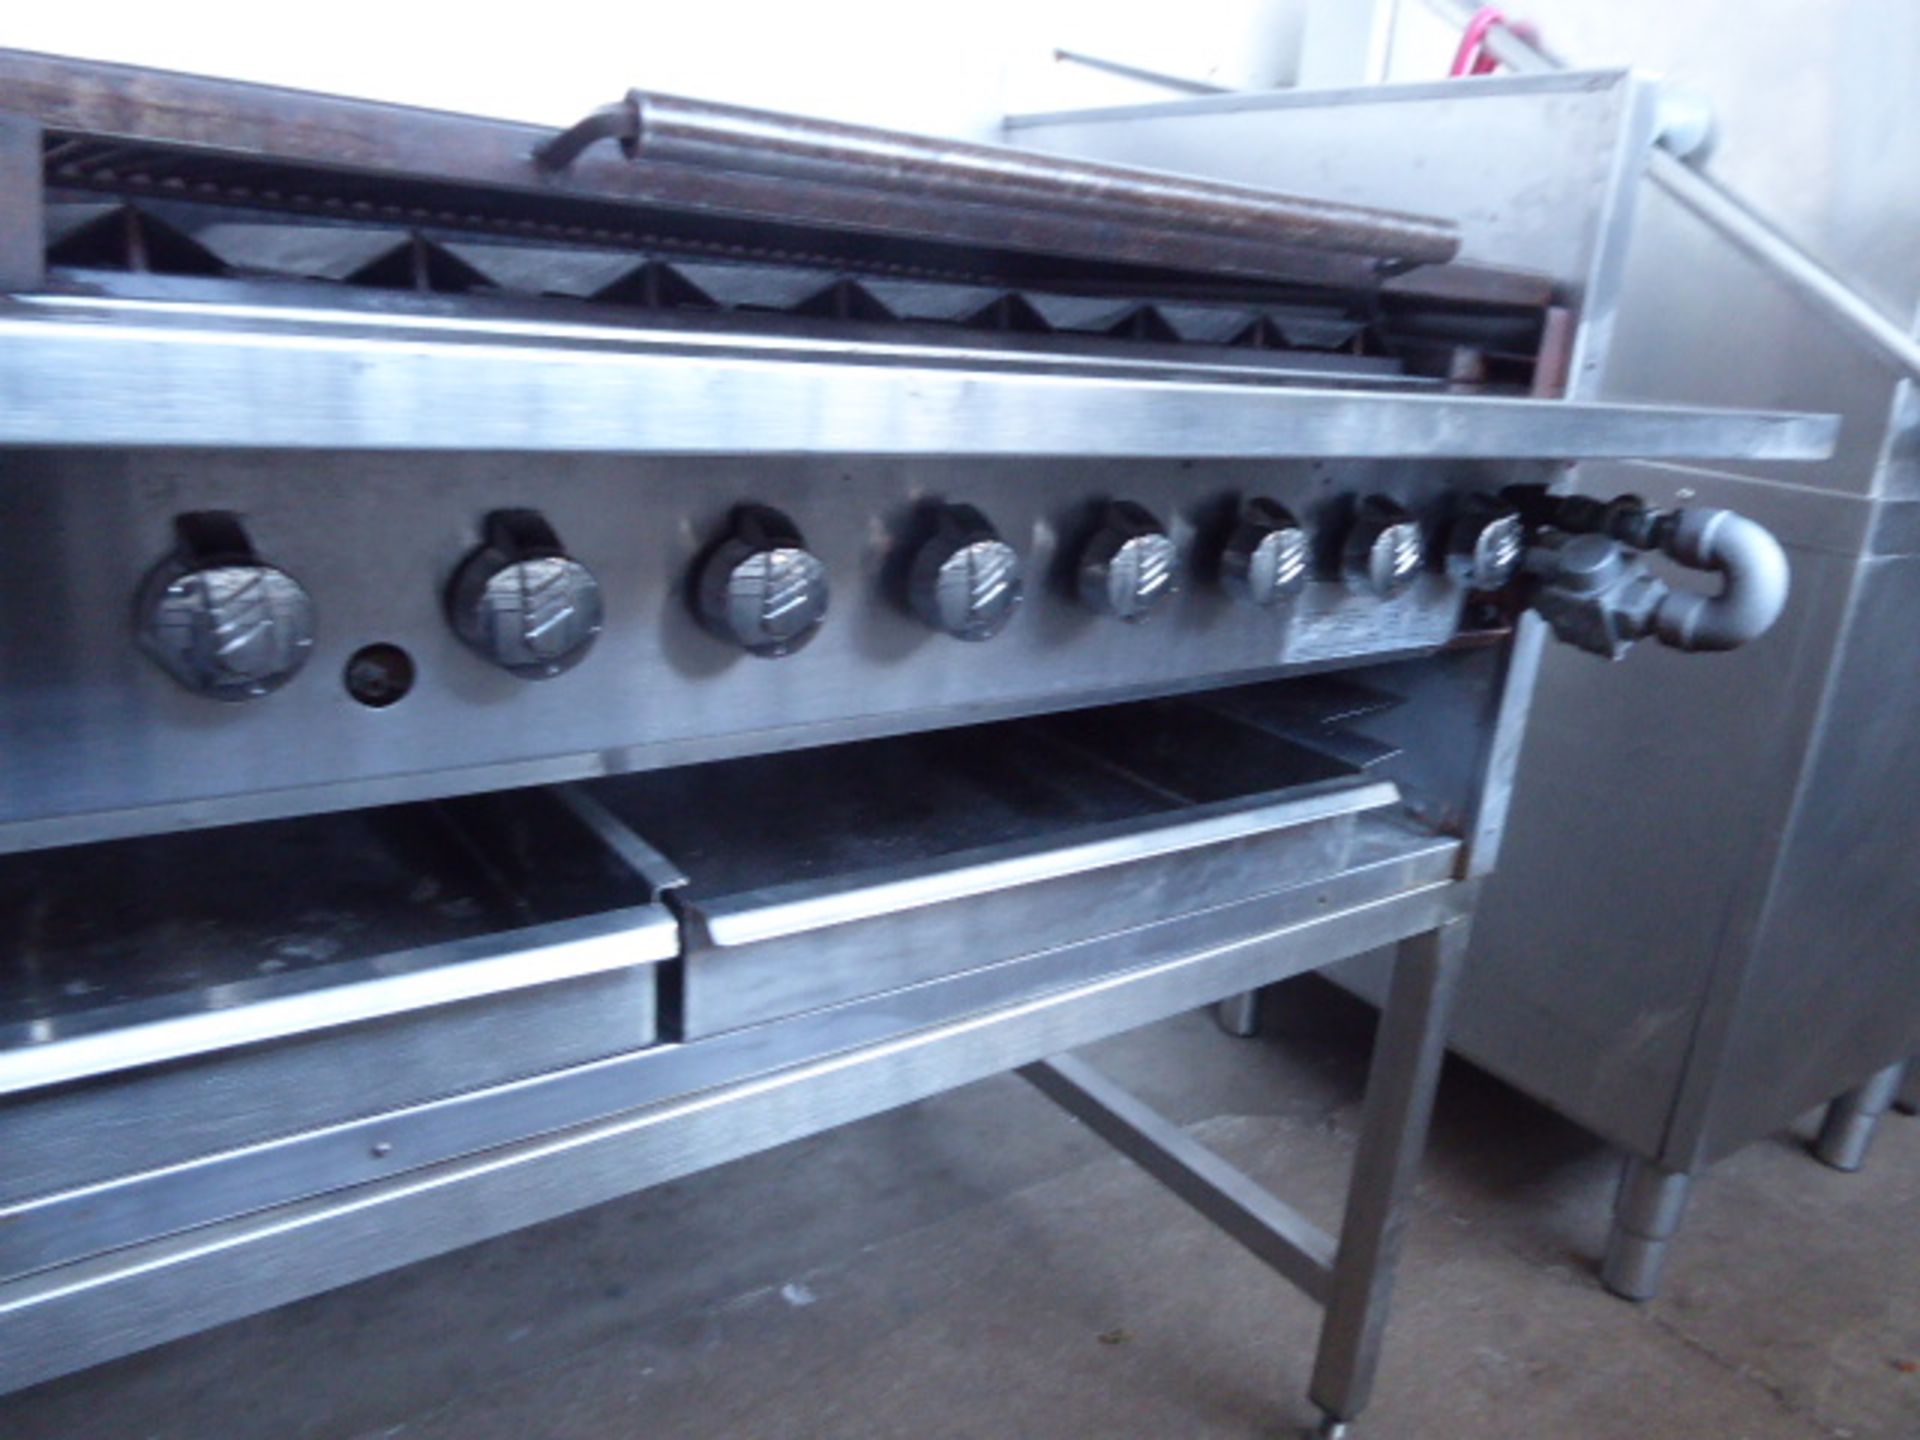 185cm Magikitch-n inc American style gas char grill with multi burners on custom built table - Image 3 of 6